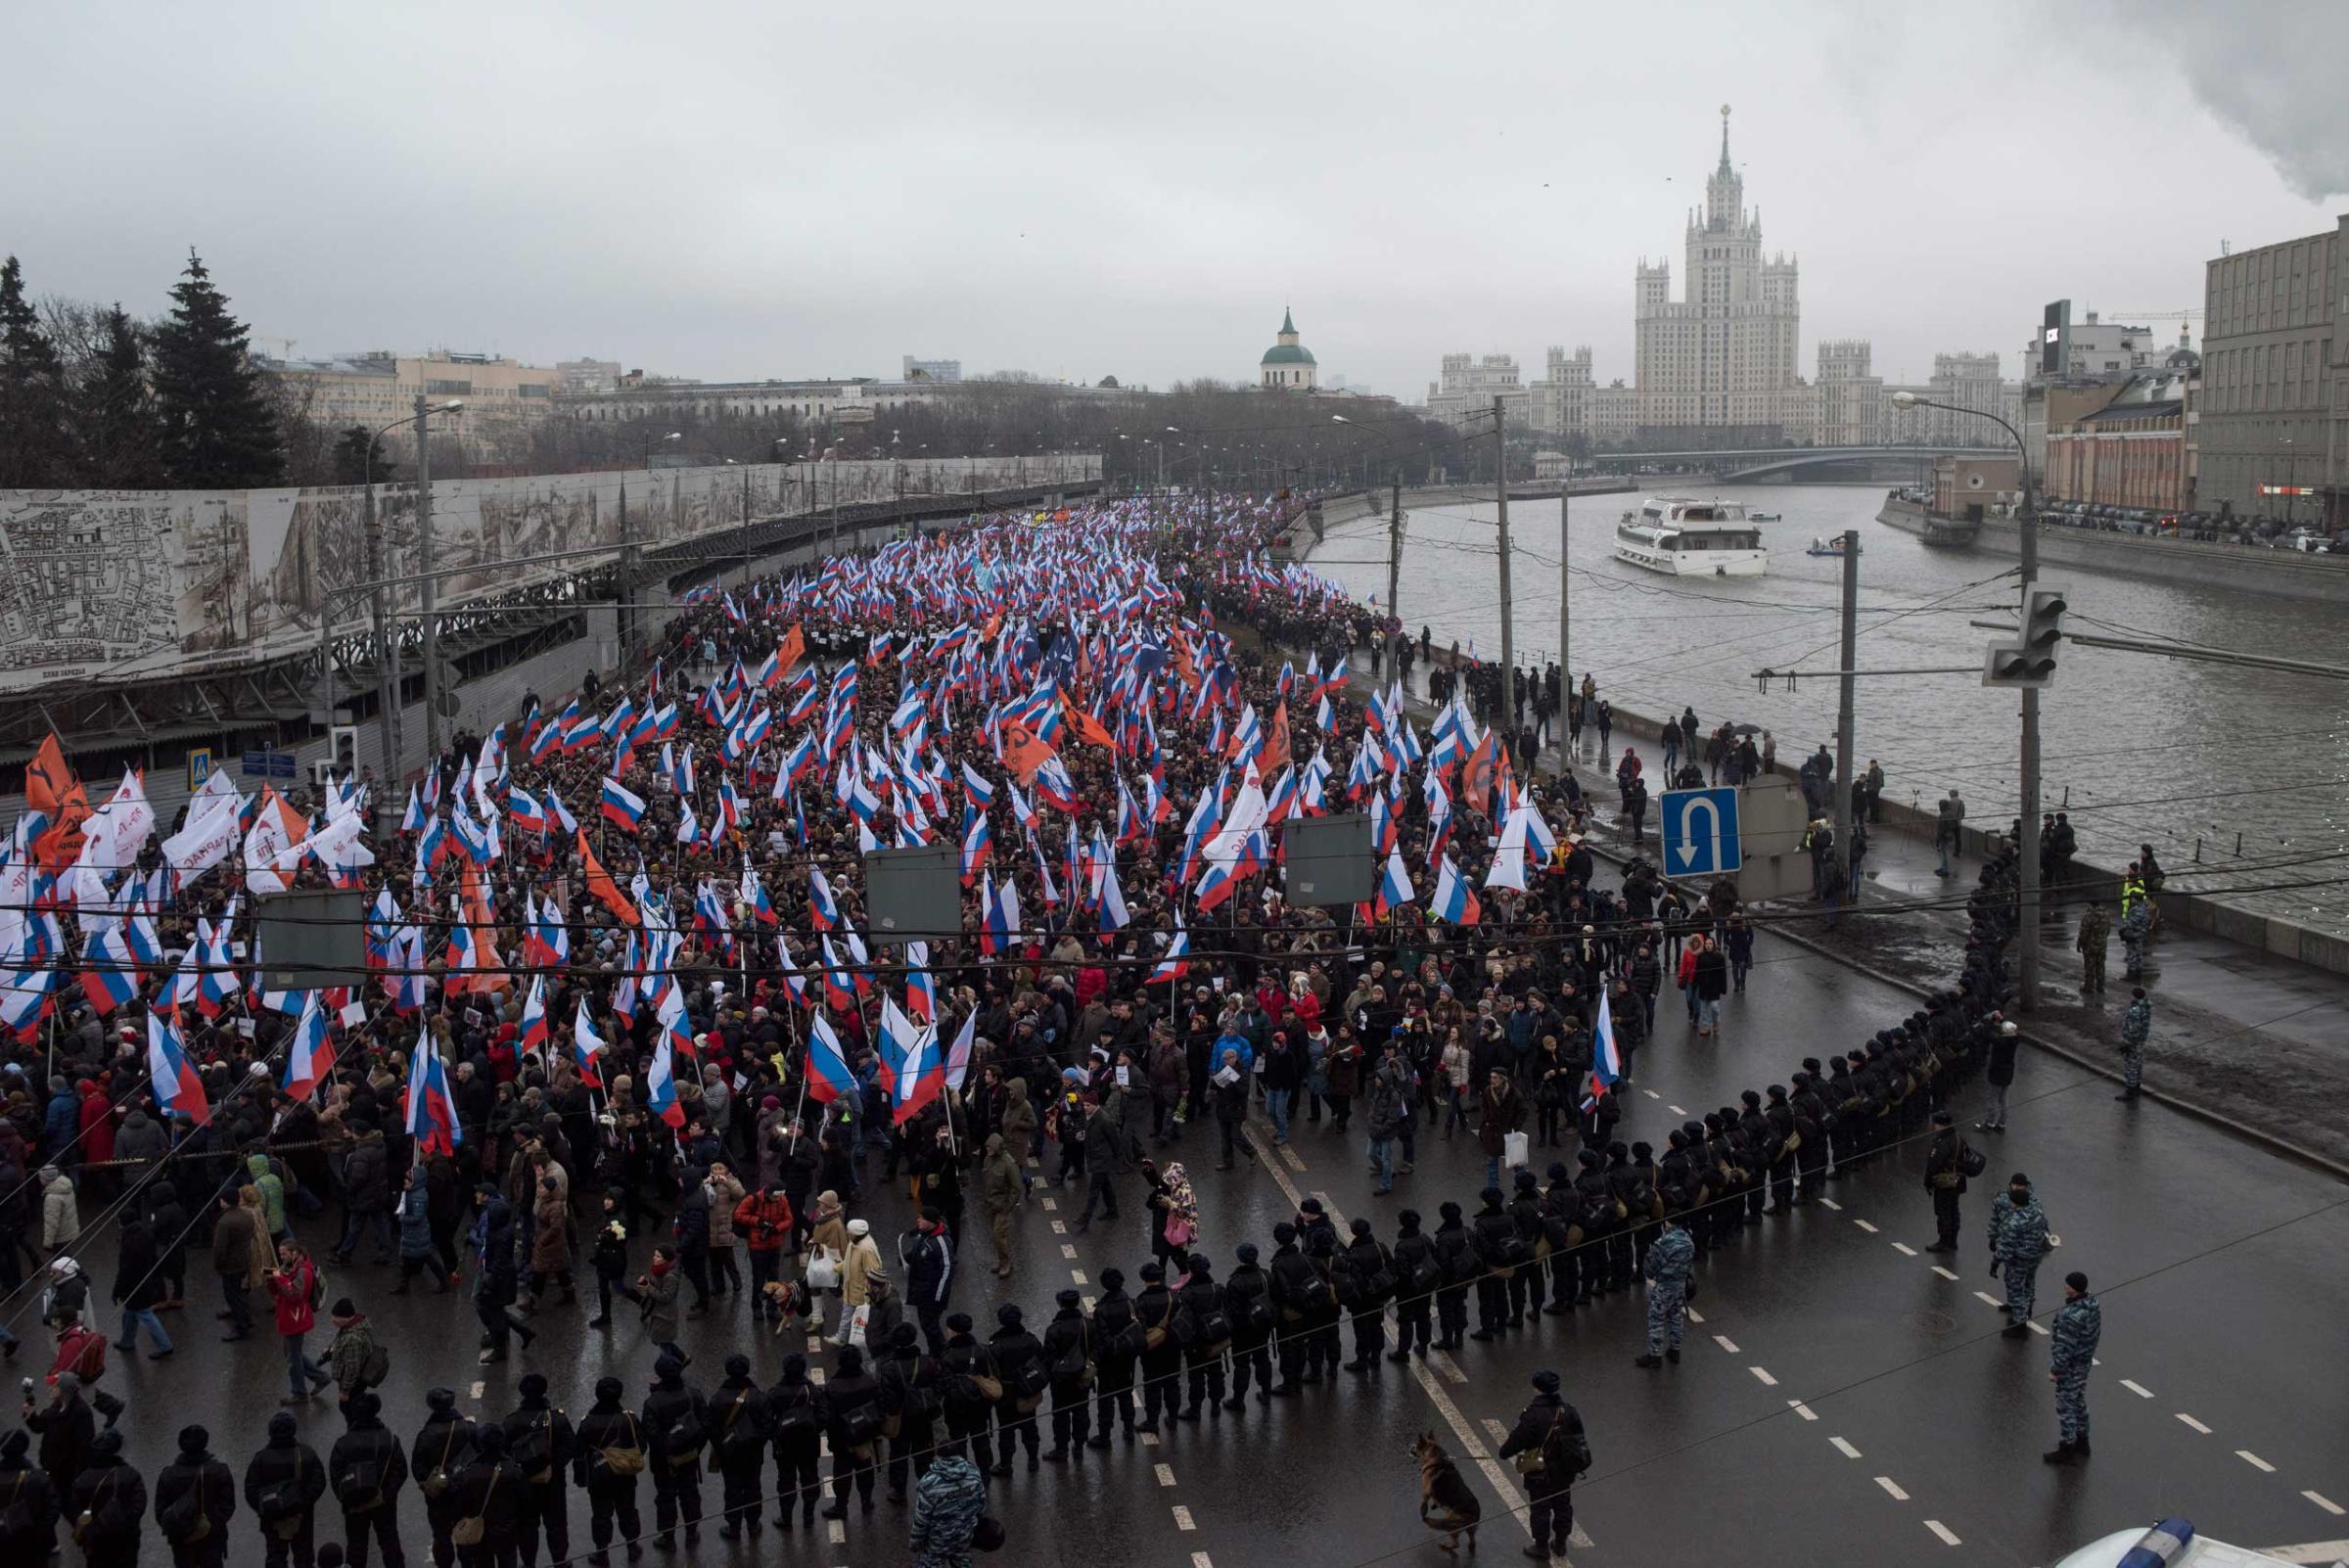 Moscow, Russia, Sunday, March 1, 2015. People carry a huge banner reading 'those bullets for everyone of us, heroes never die!' as they march in memory of opposition leader Boris Nemtsov who was gunned down on Friday, Feb. 27, 2015 near the Kremlin.Thousands converged Sunday in central Moscow to mourn veteran liberal politician Boris Nemtsov, whose killing on the streets of the capital has shaken Russia’s beleaguered opposition. They carried flowers, portraits and white signs that said “I am not afraid.”